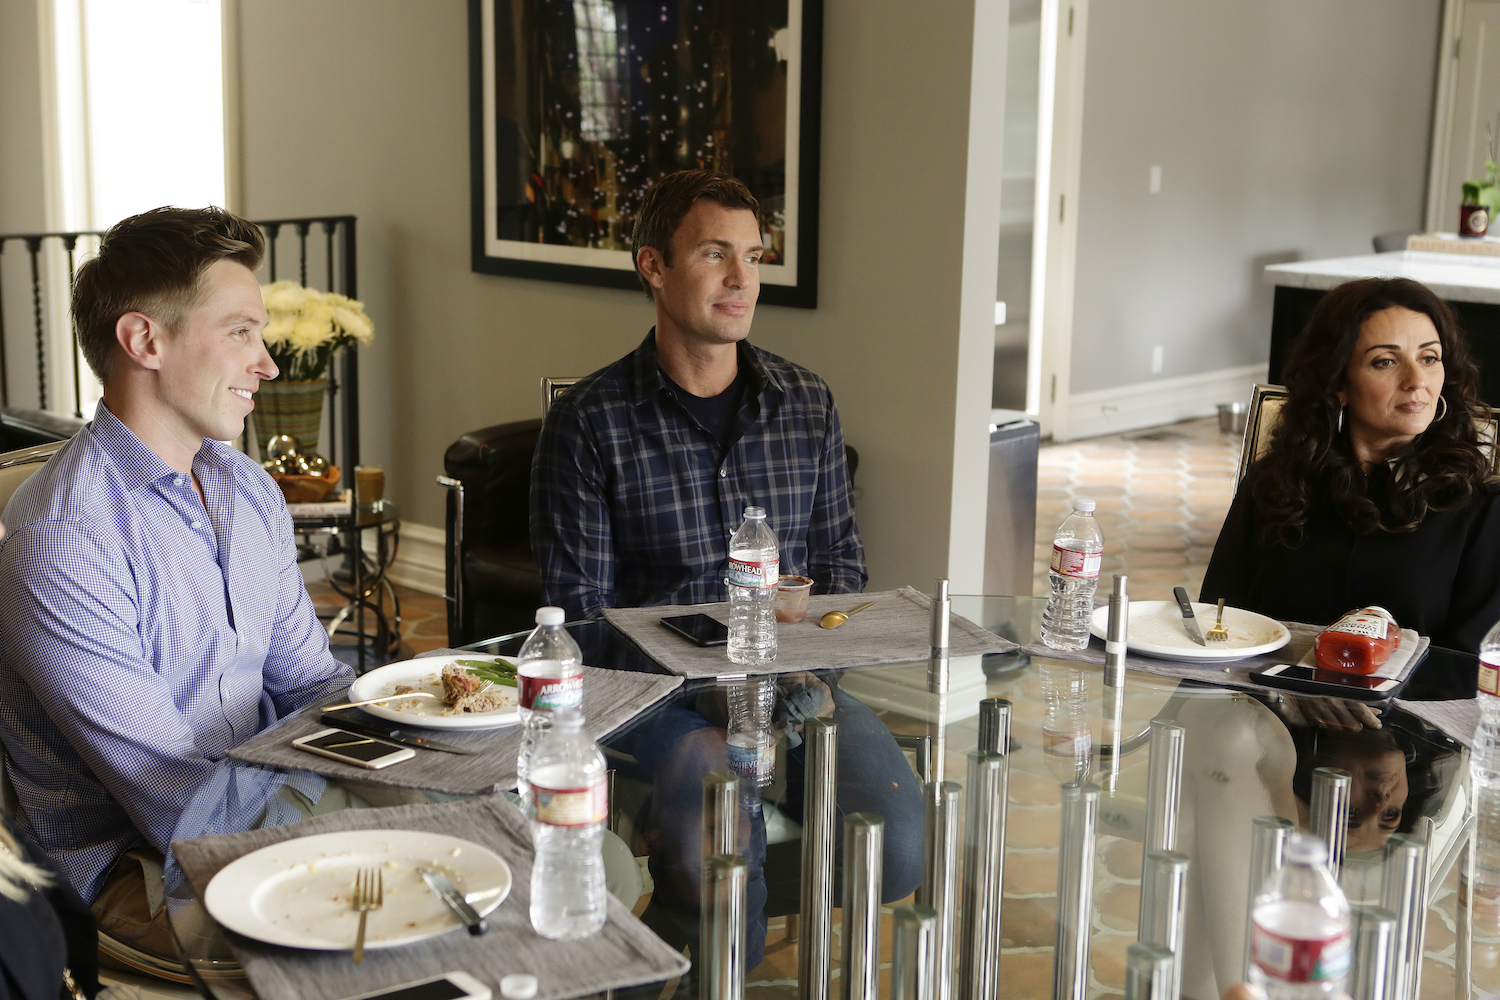 Gage Edwad, Jeff Lewis and Jenni Pulos sitting at a table 